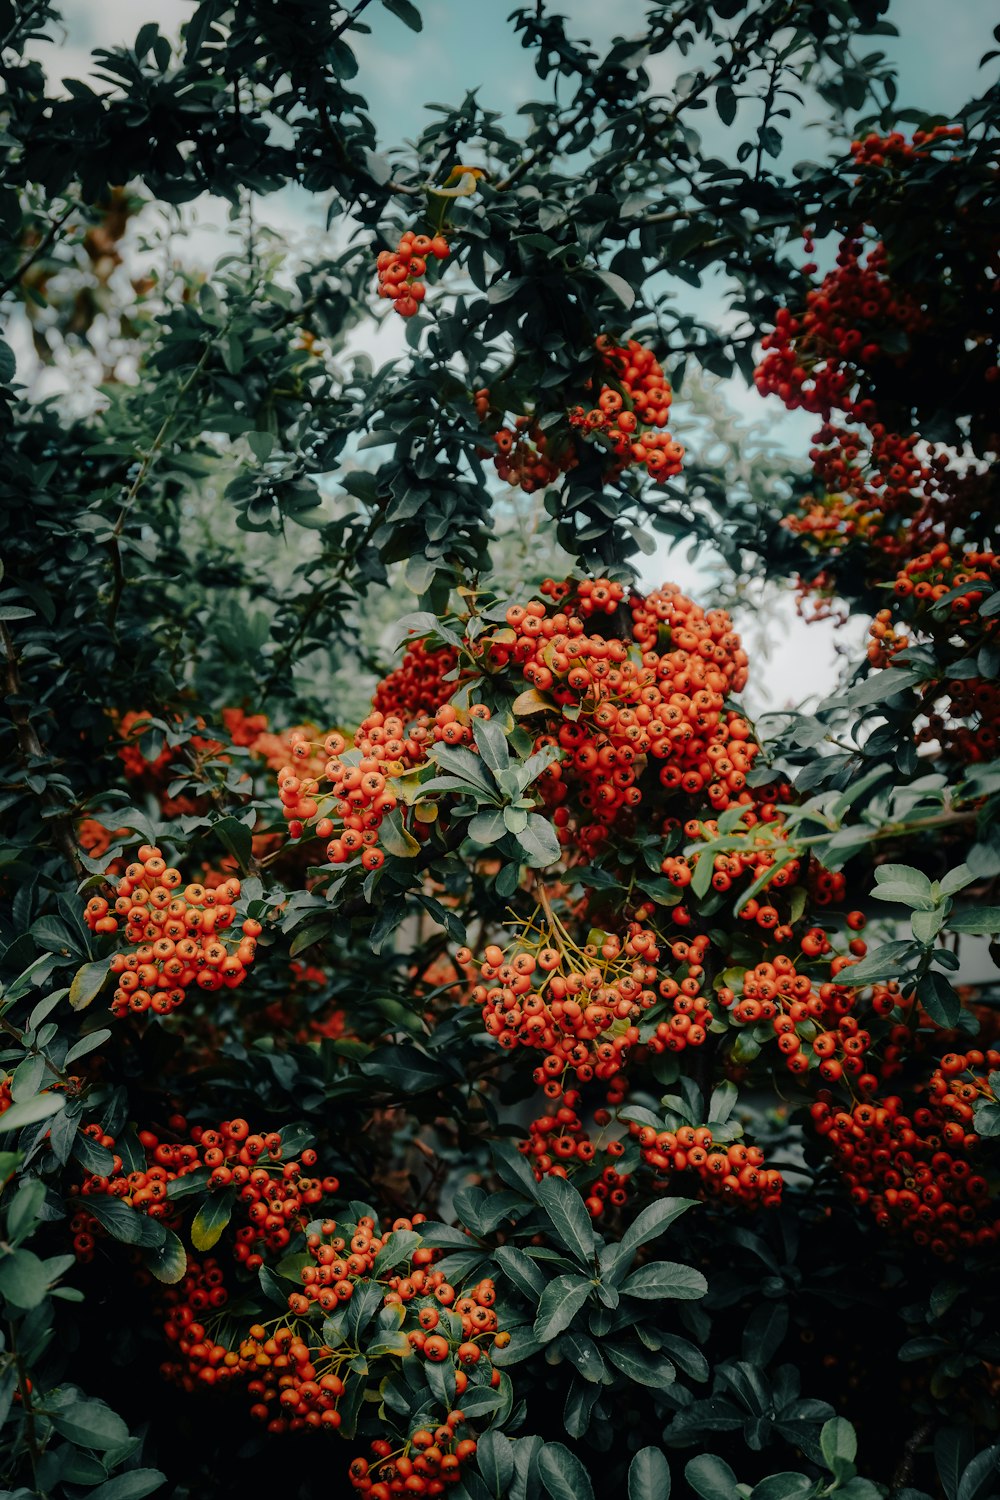 a tree filled with lots of red berries